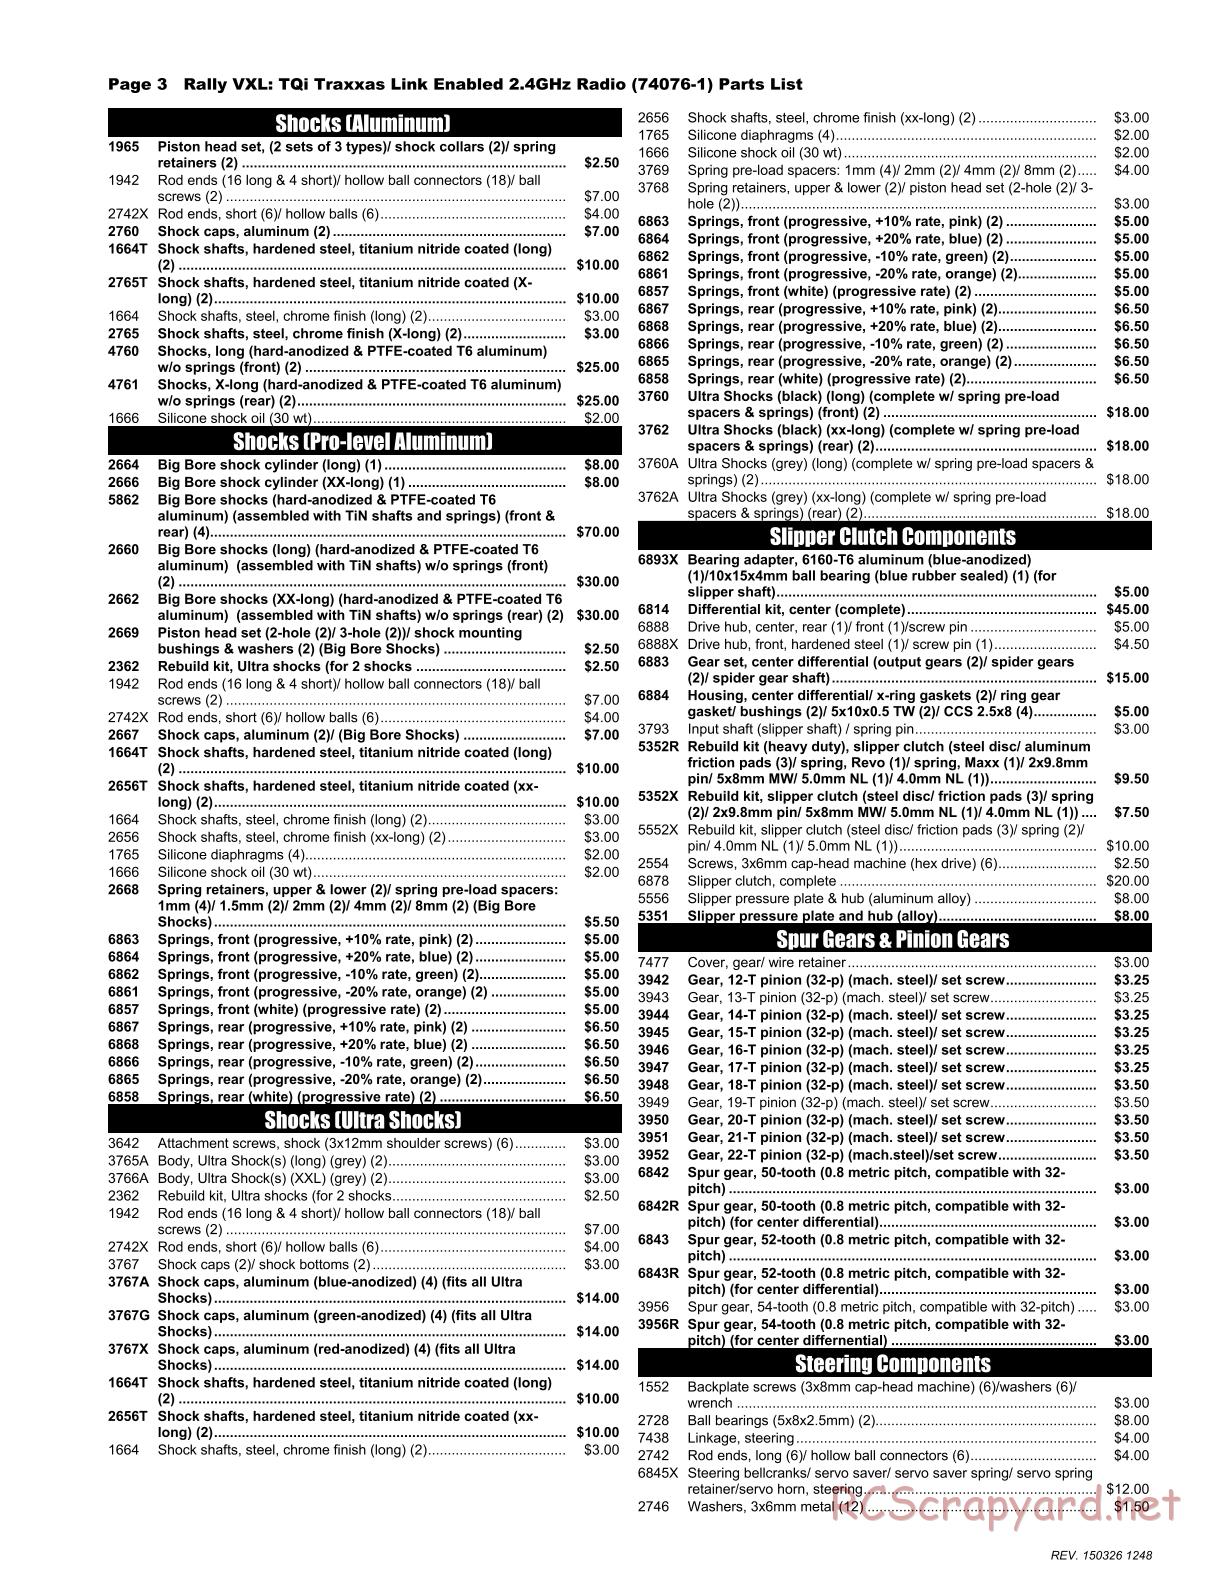 Traxxas - Rally (2015) - Parts List - Page 3